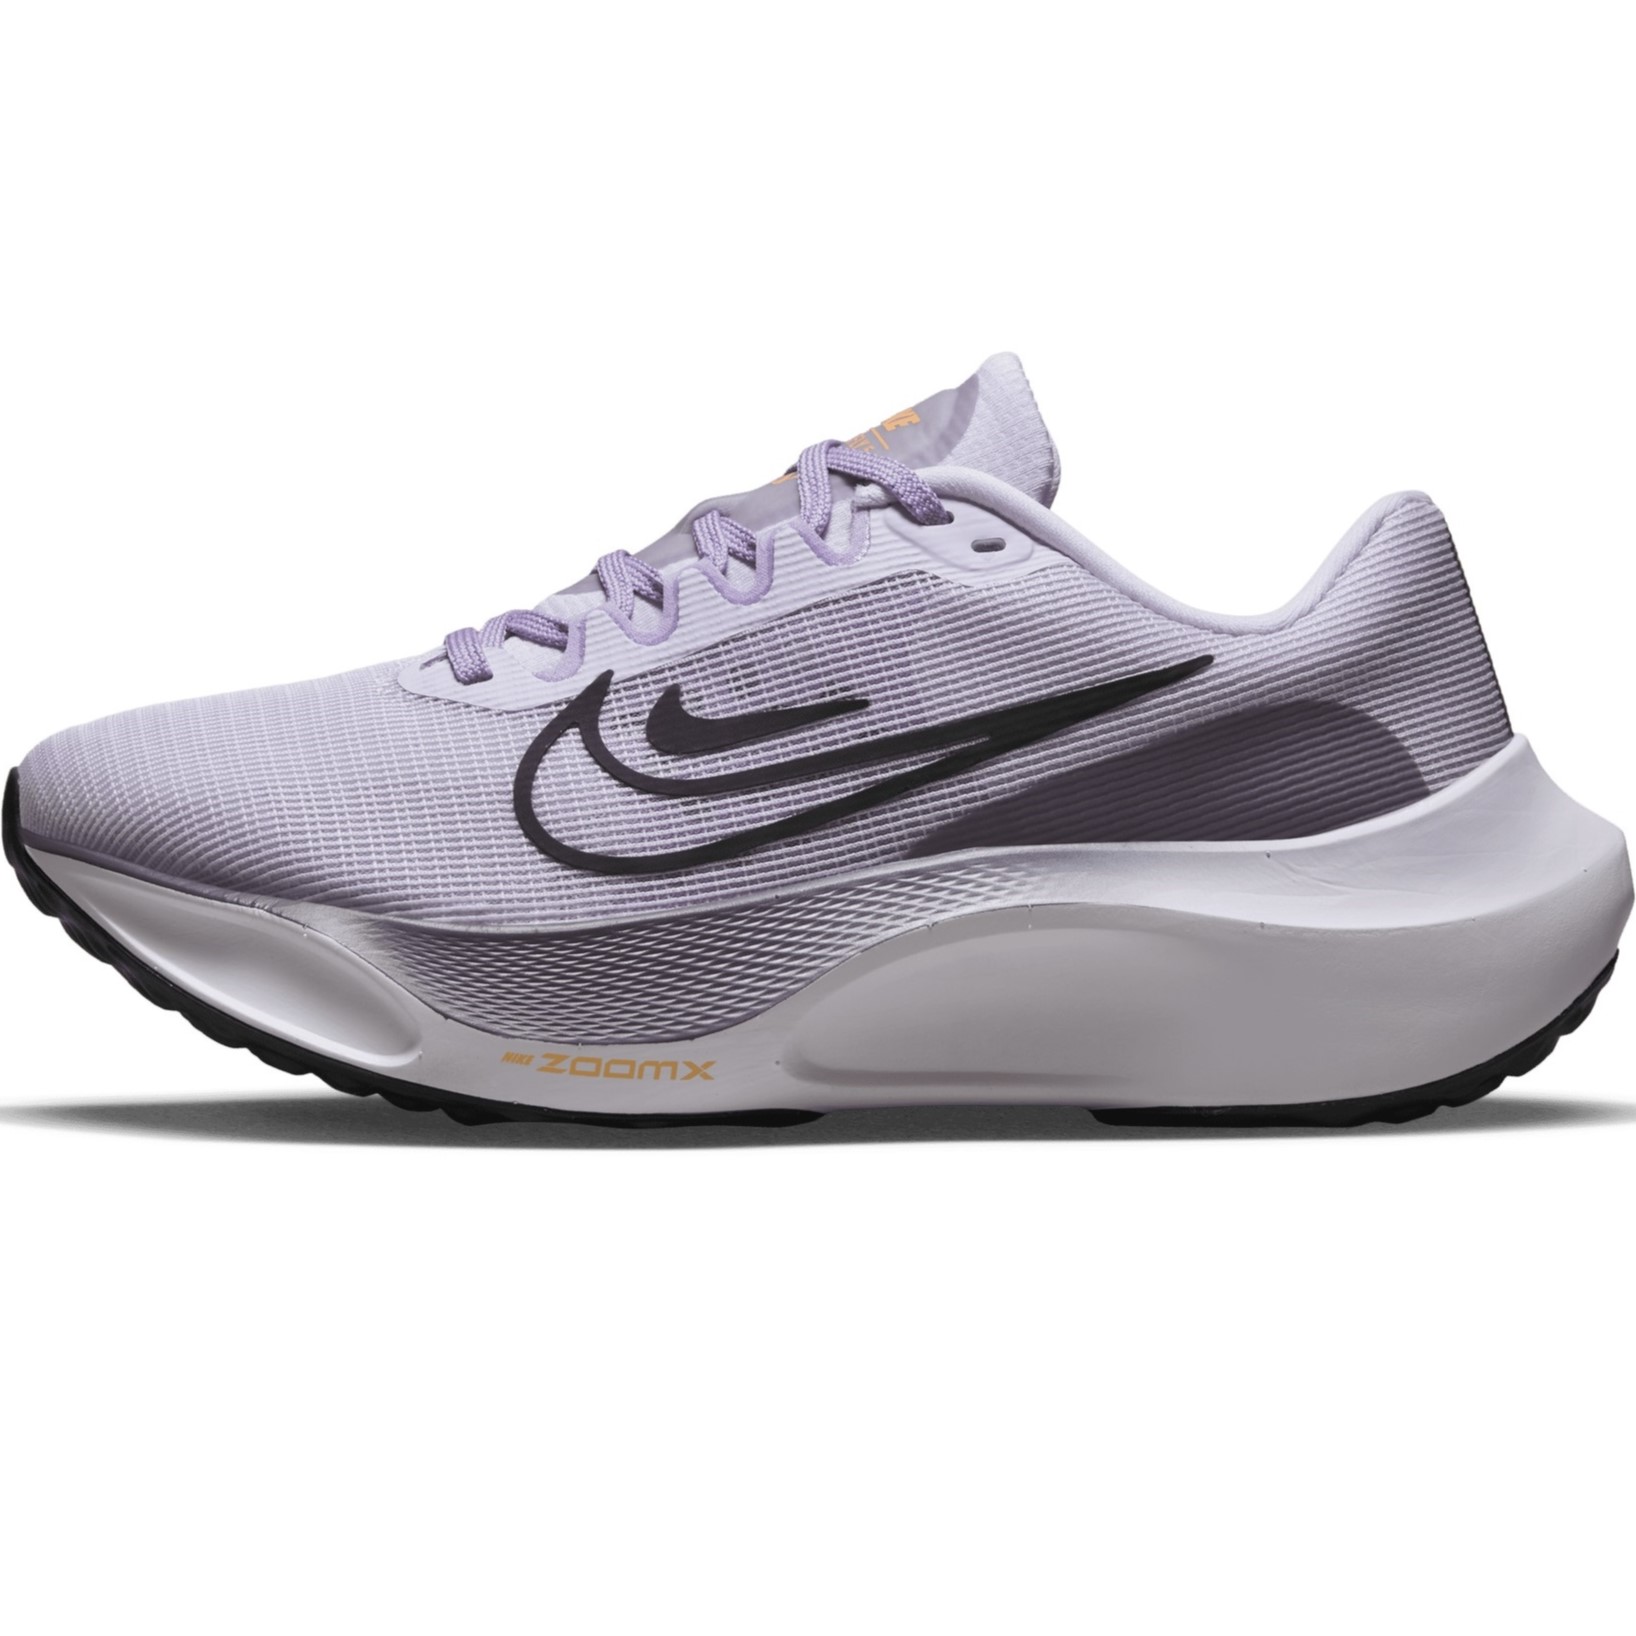 GIÀY NIKE NỮ ZOOM FLY 5 WOMEN ROAD RUNNING SHOES BARELY GRAPE DM8974-500 8